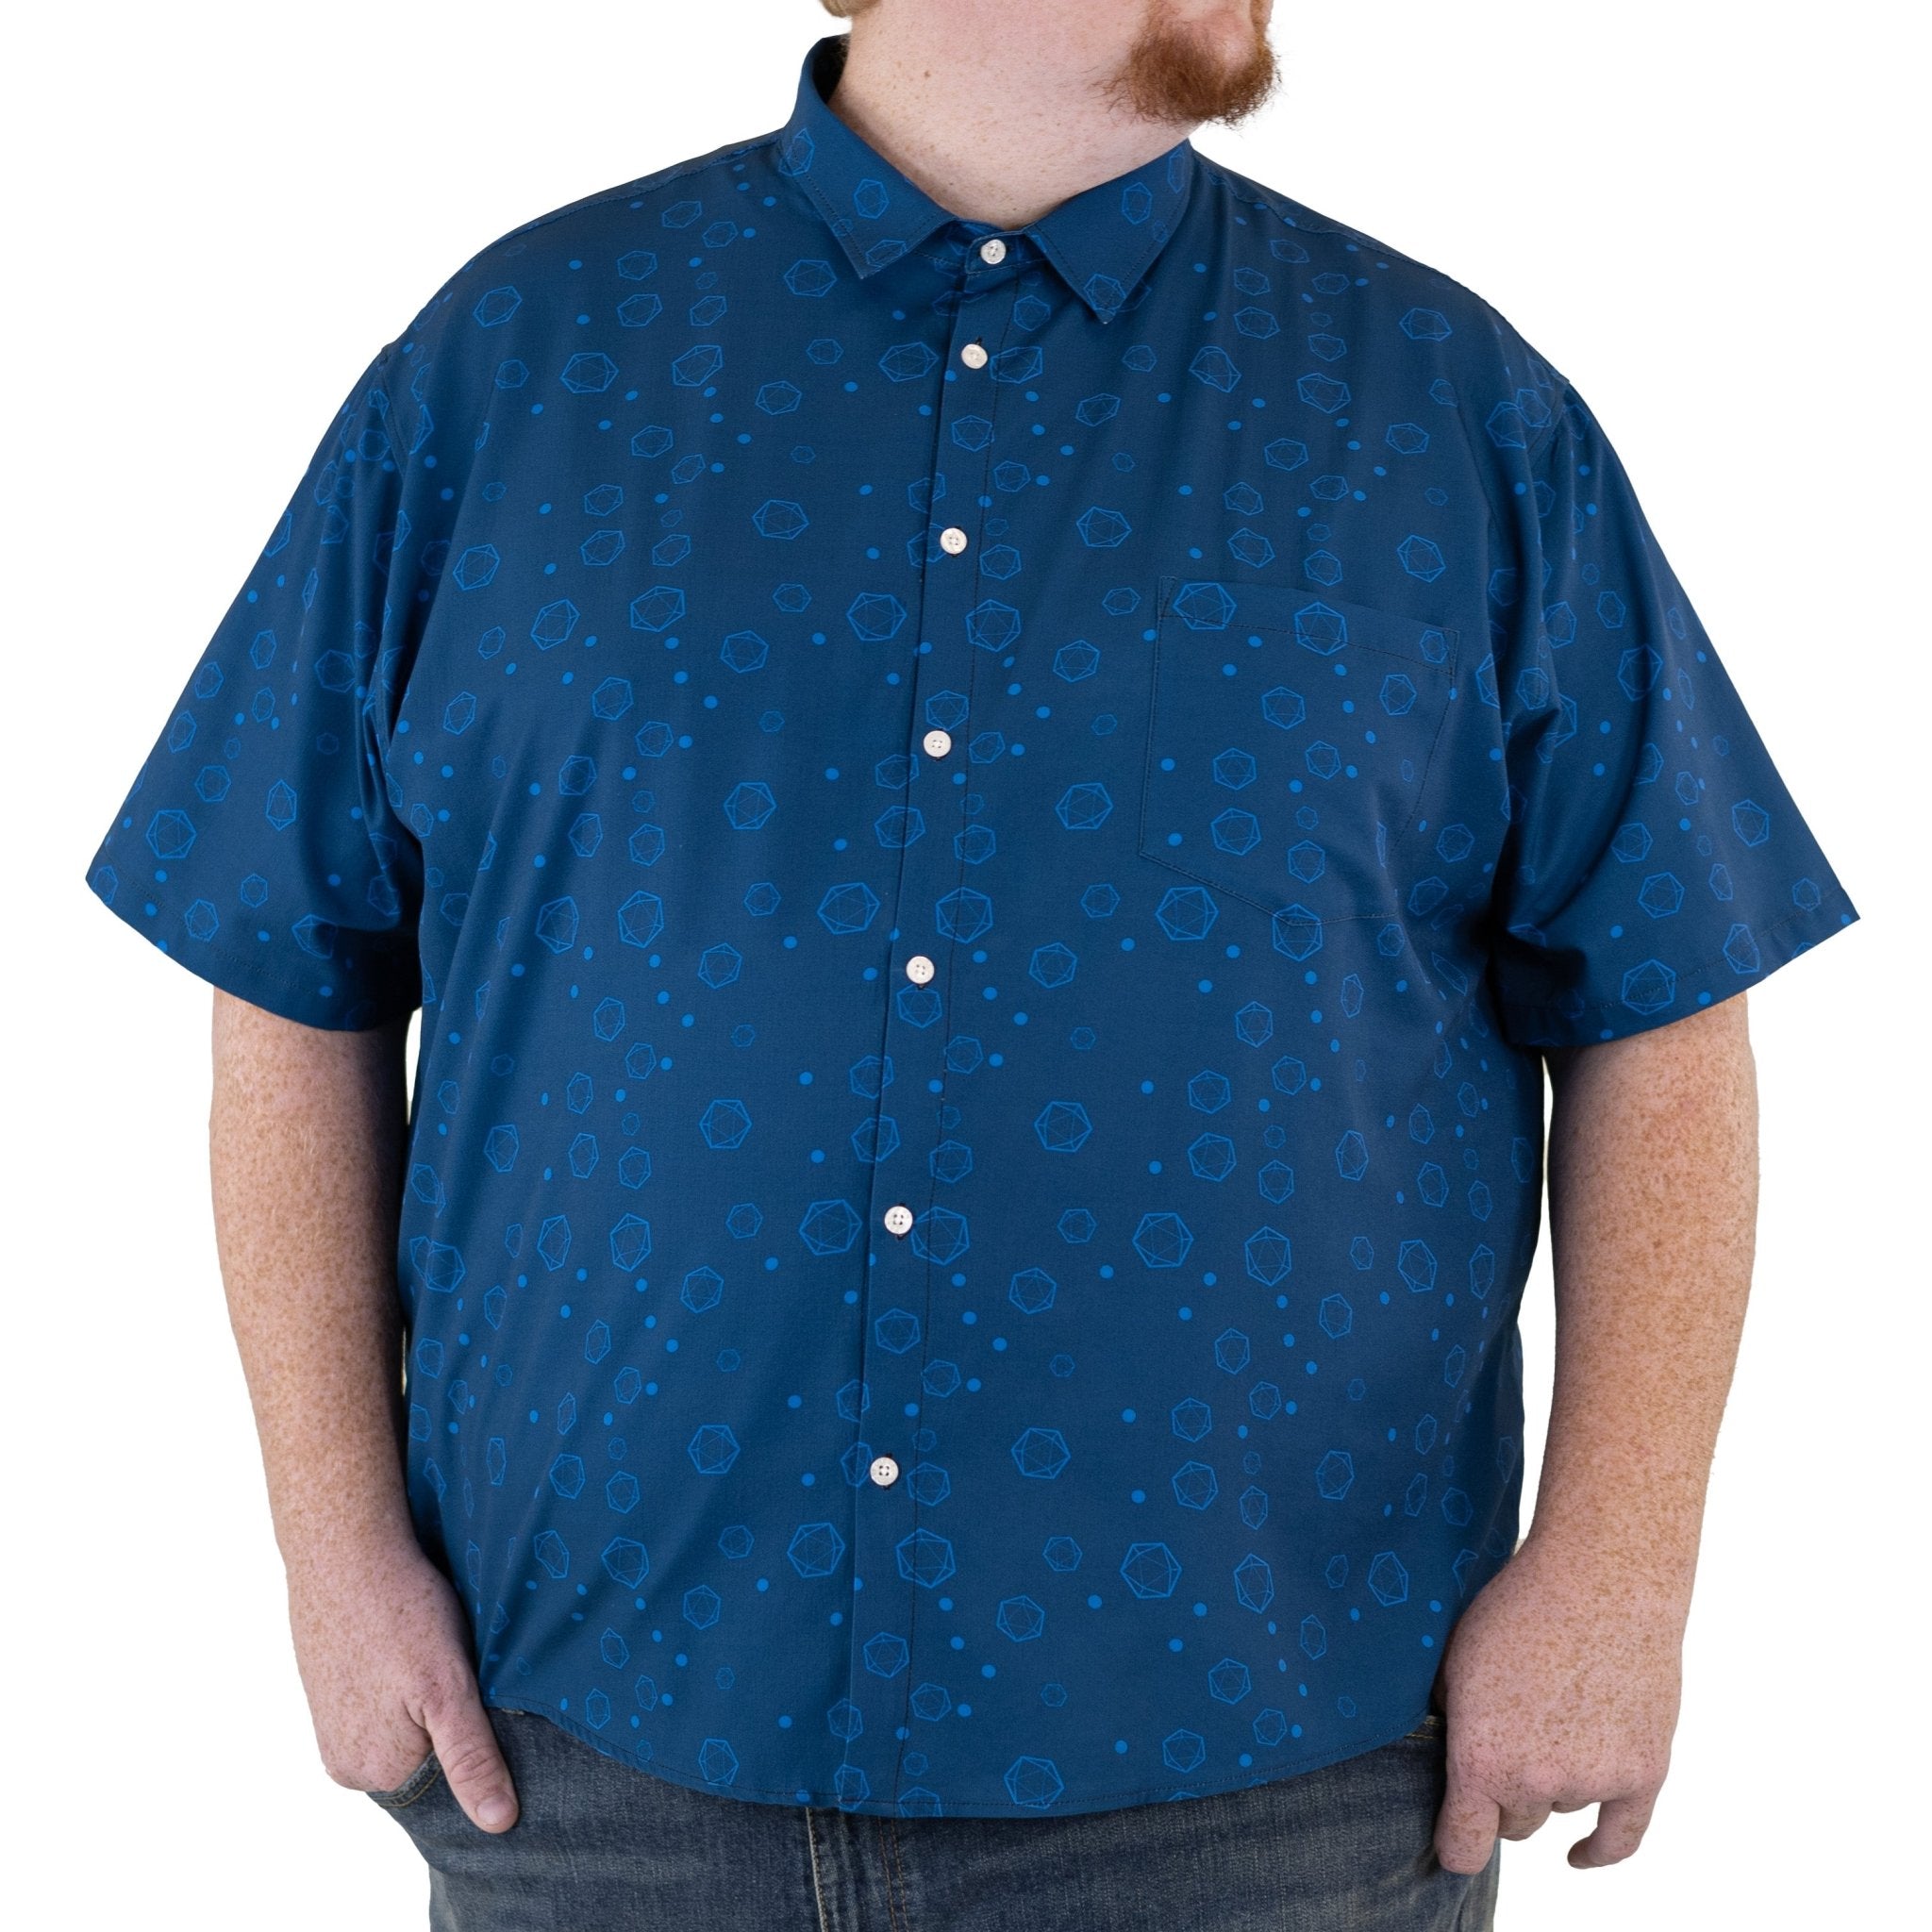 Ready-to-Ship Dnd Dice Bubbles Button Up Shirt - adult sizing - Design by Heather Davenport - dnd & rpg print